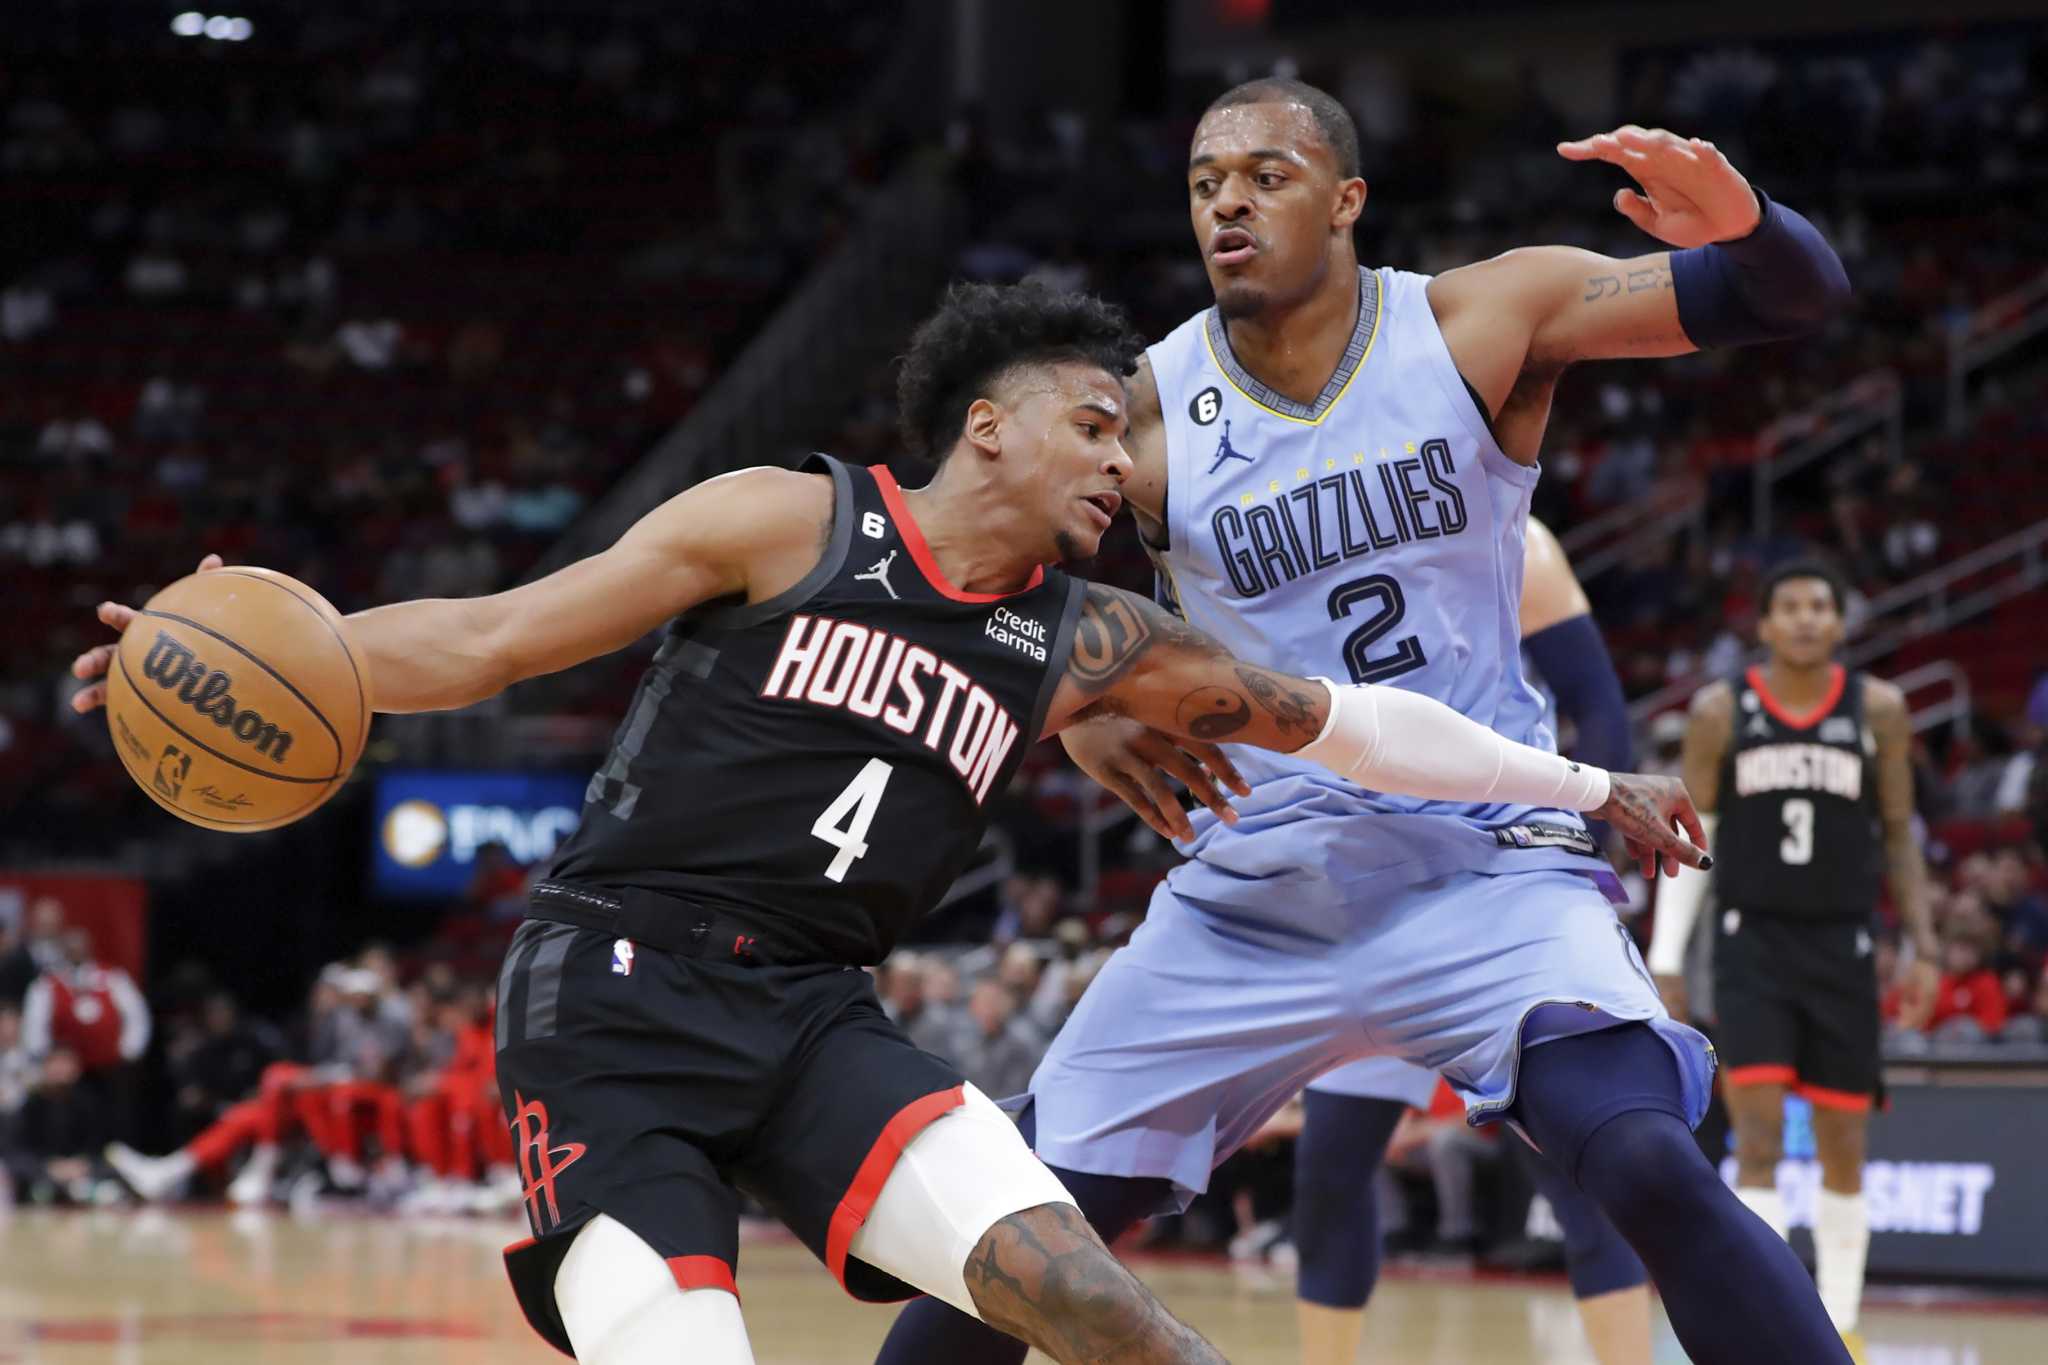 Houston Rockets: Losing streak at 11 after loss to Memphis Grizzlies